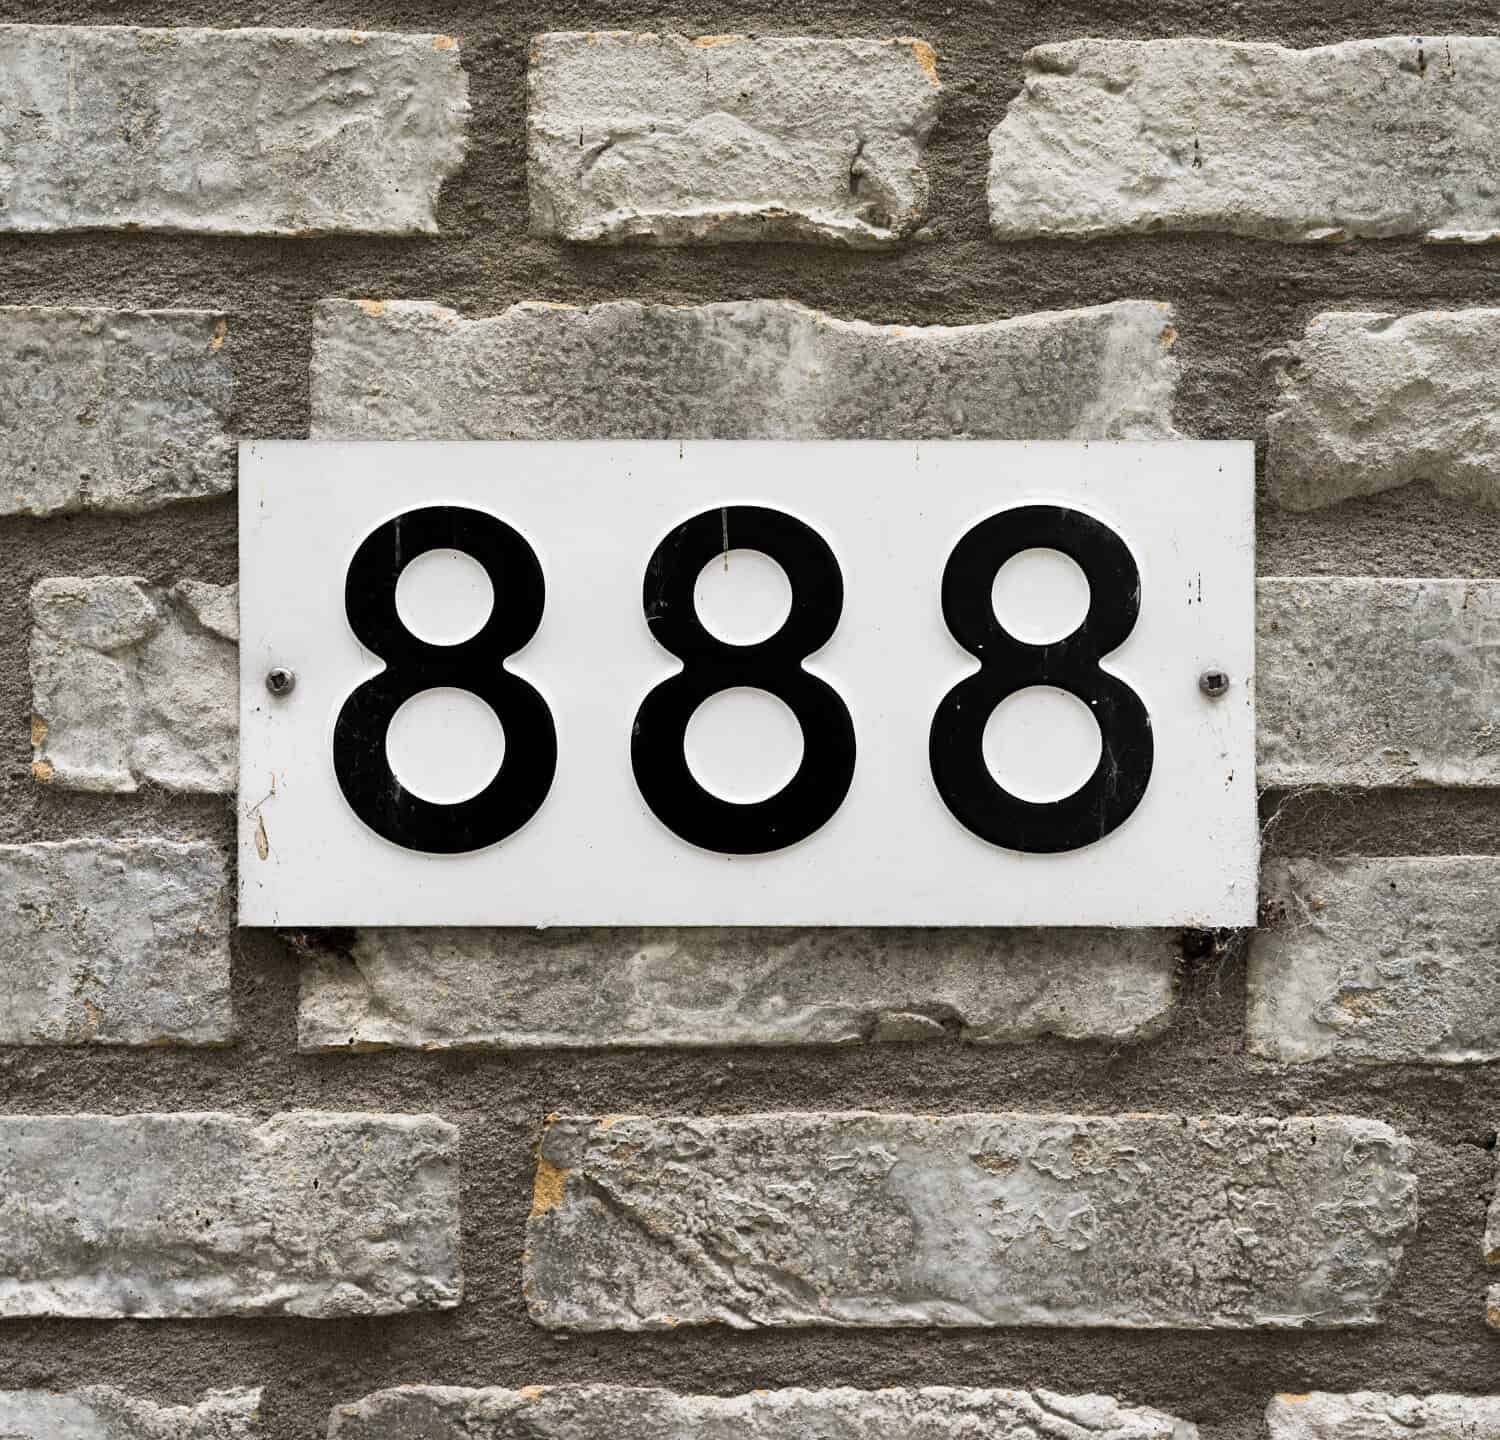 House number eight hundred and eighty eight.